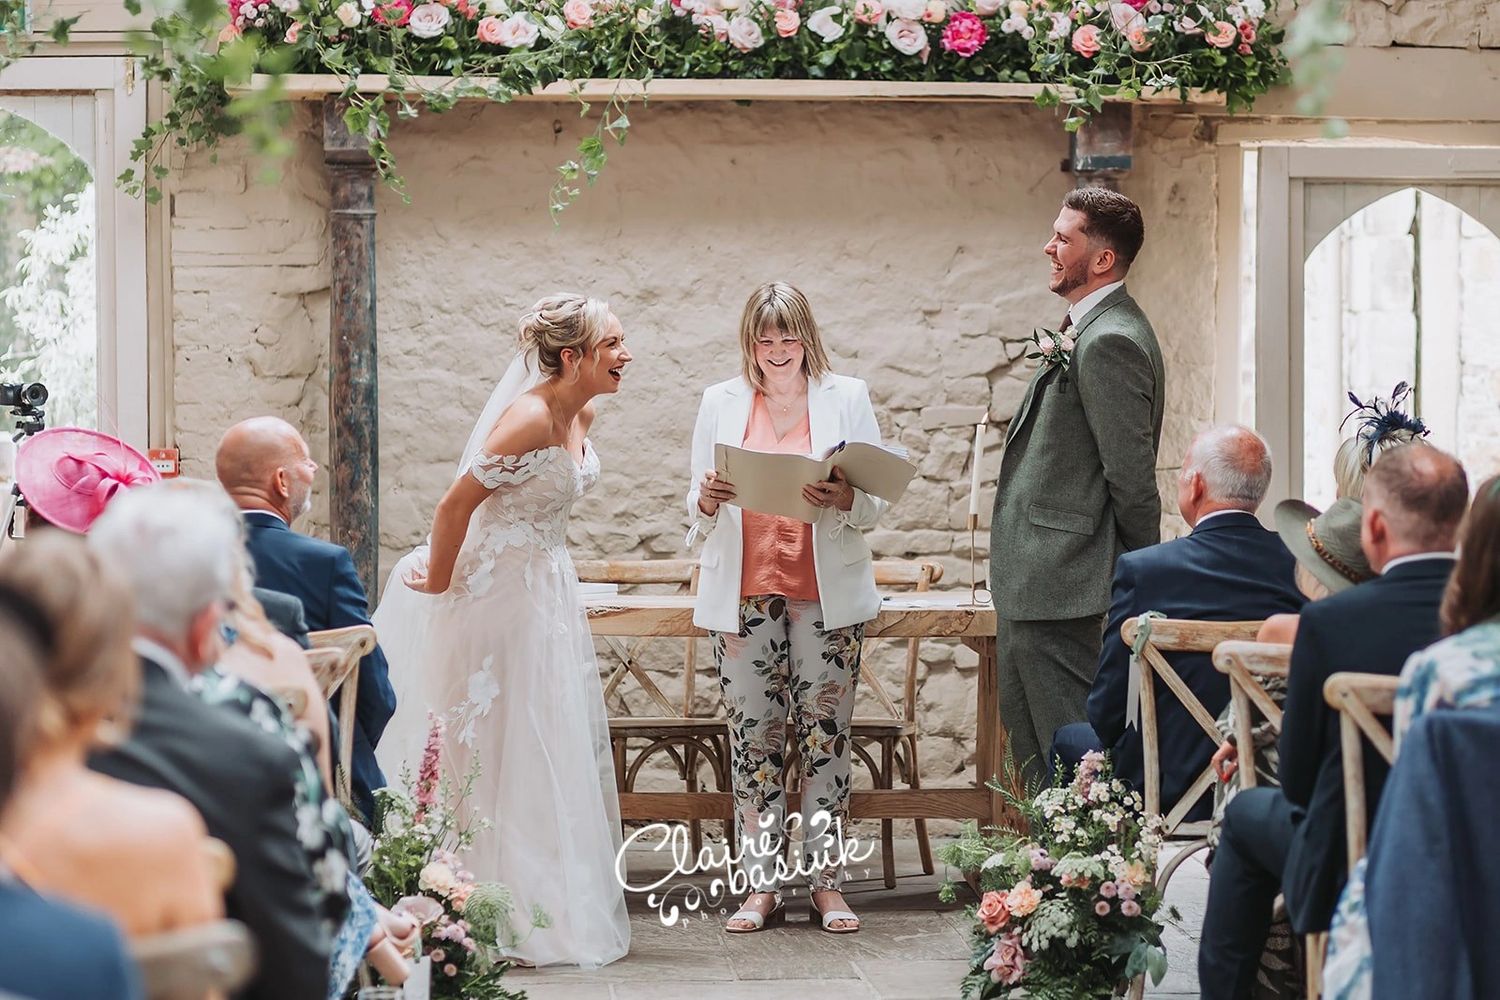 Celebrant Ceremony in a rustic barn. Image by @clairebasiukphoto 